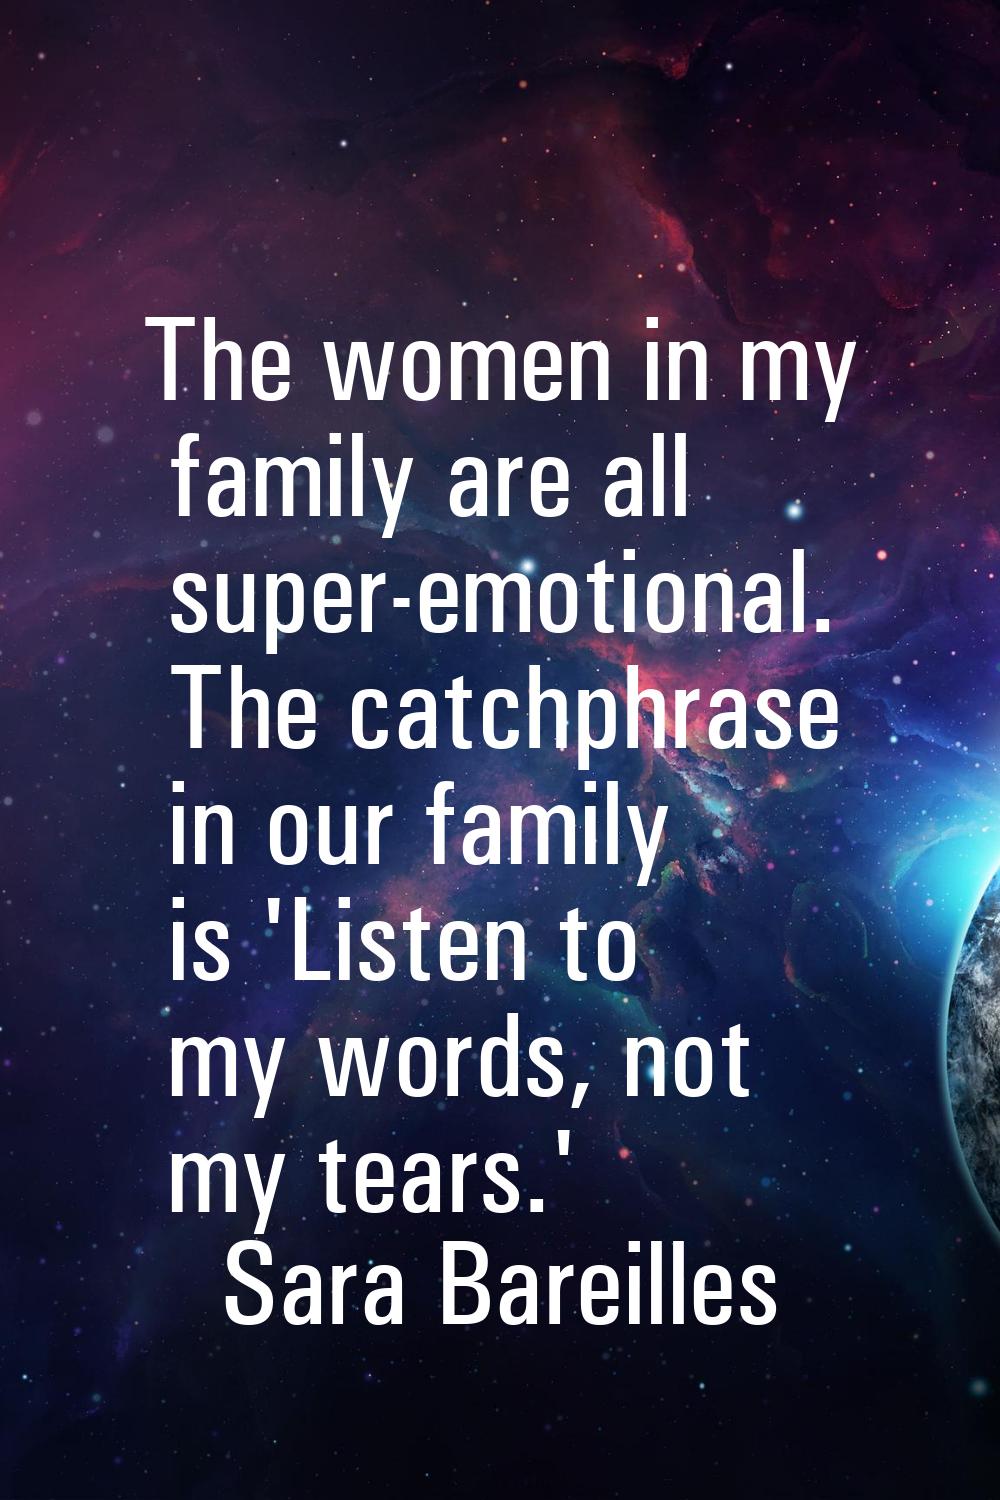 The women in my family are all super-emotional. The catchphrase in our family is 'Listen to my word